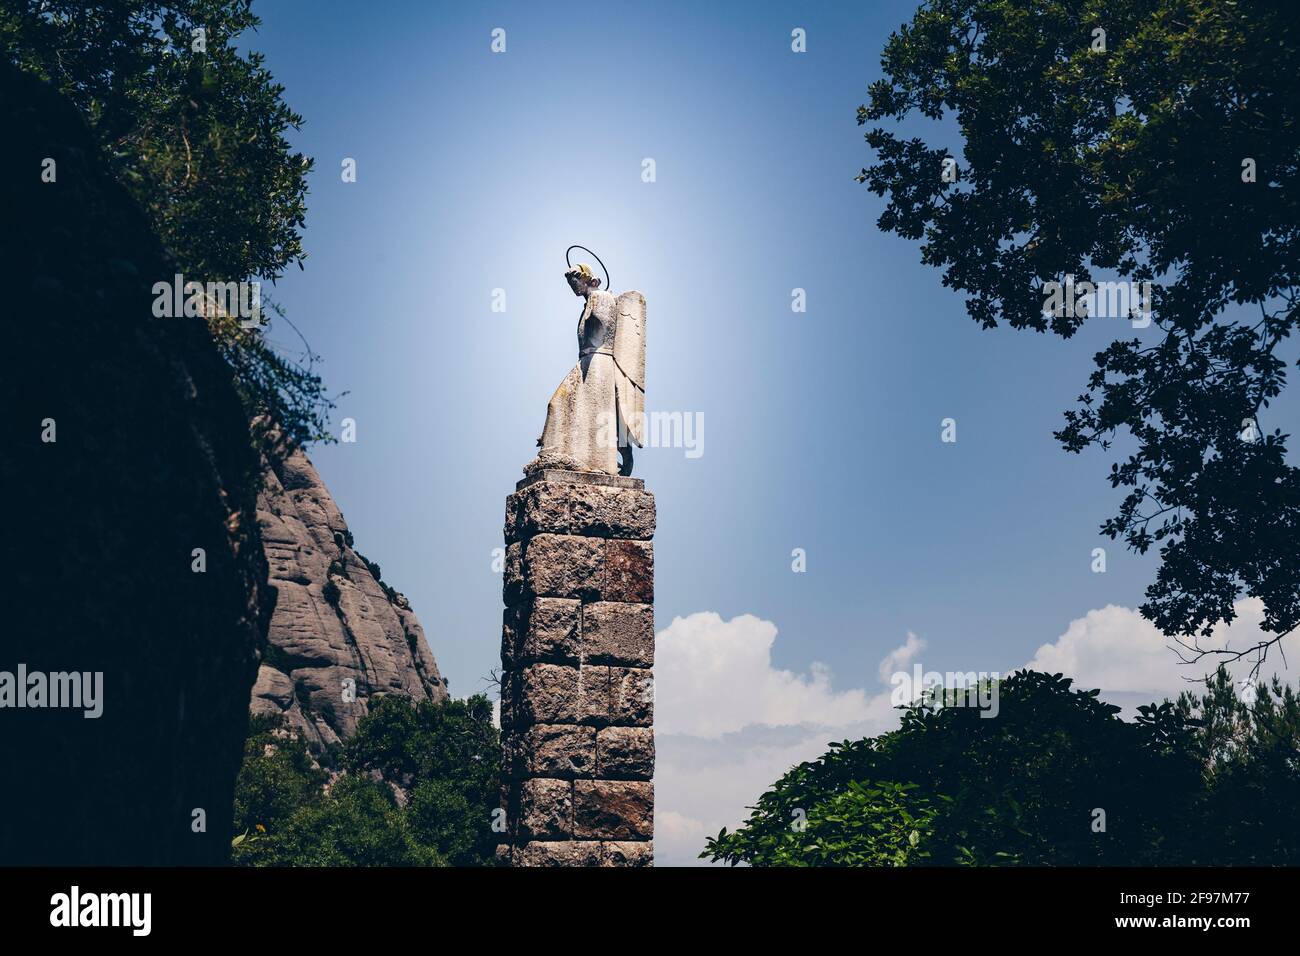 Statue of Santa Maria at the monastery Montserrat in Monistrol - regular there are 10.000 people a day - during Corona there were only around 40 people in the whole area. Catalonia, Spain Stock Photo